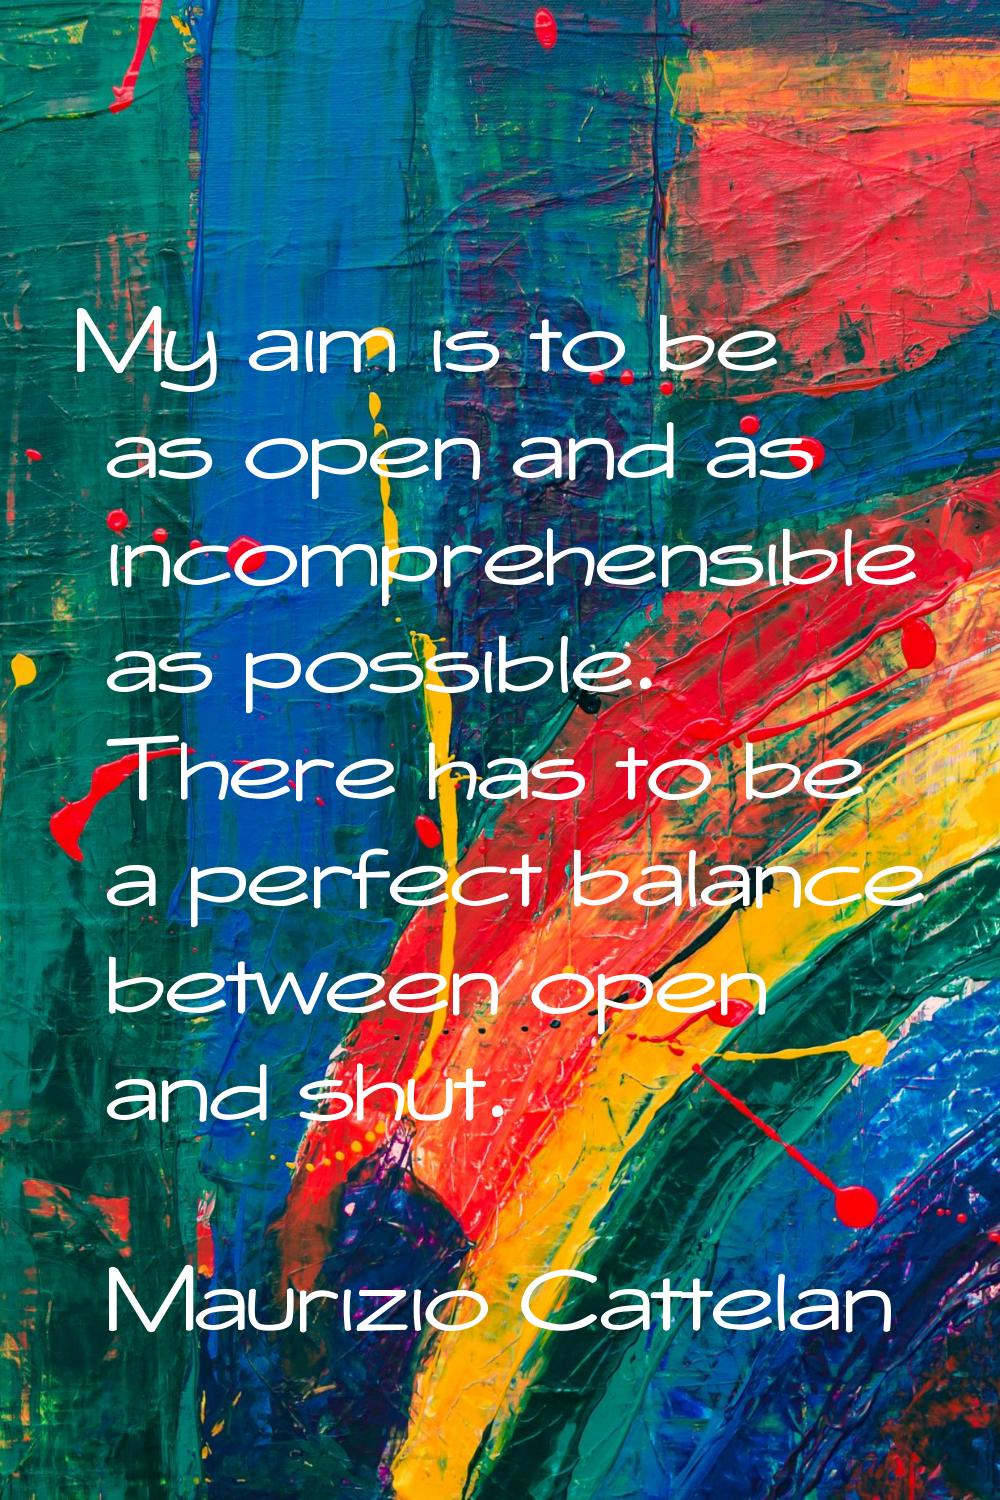 My aim is to be as open and as incomprehensible as possible. There has to be a perfect balance betw